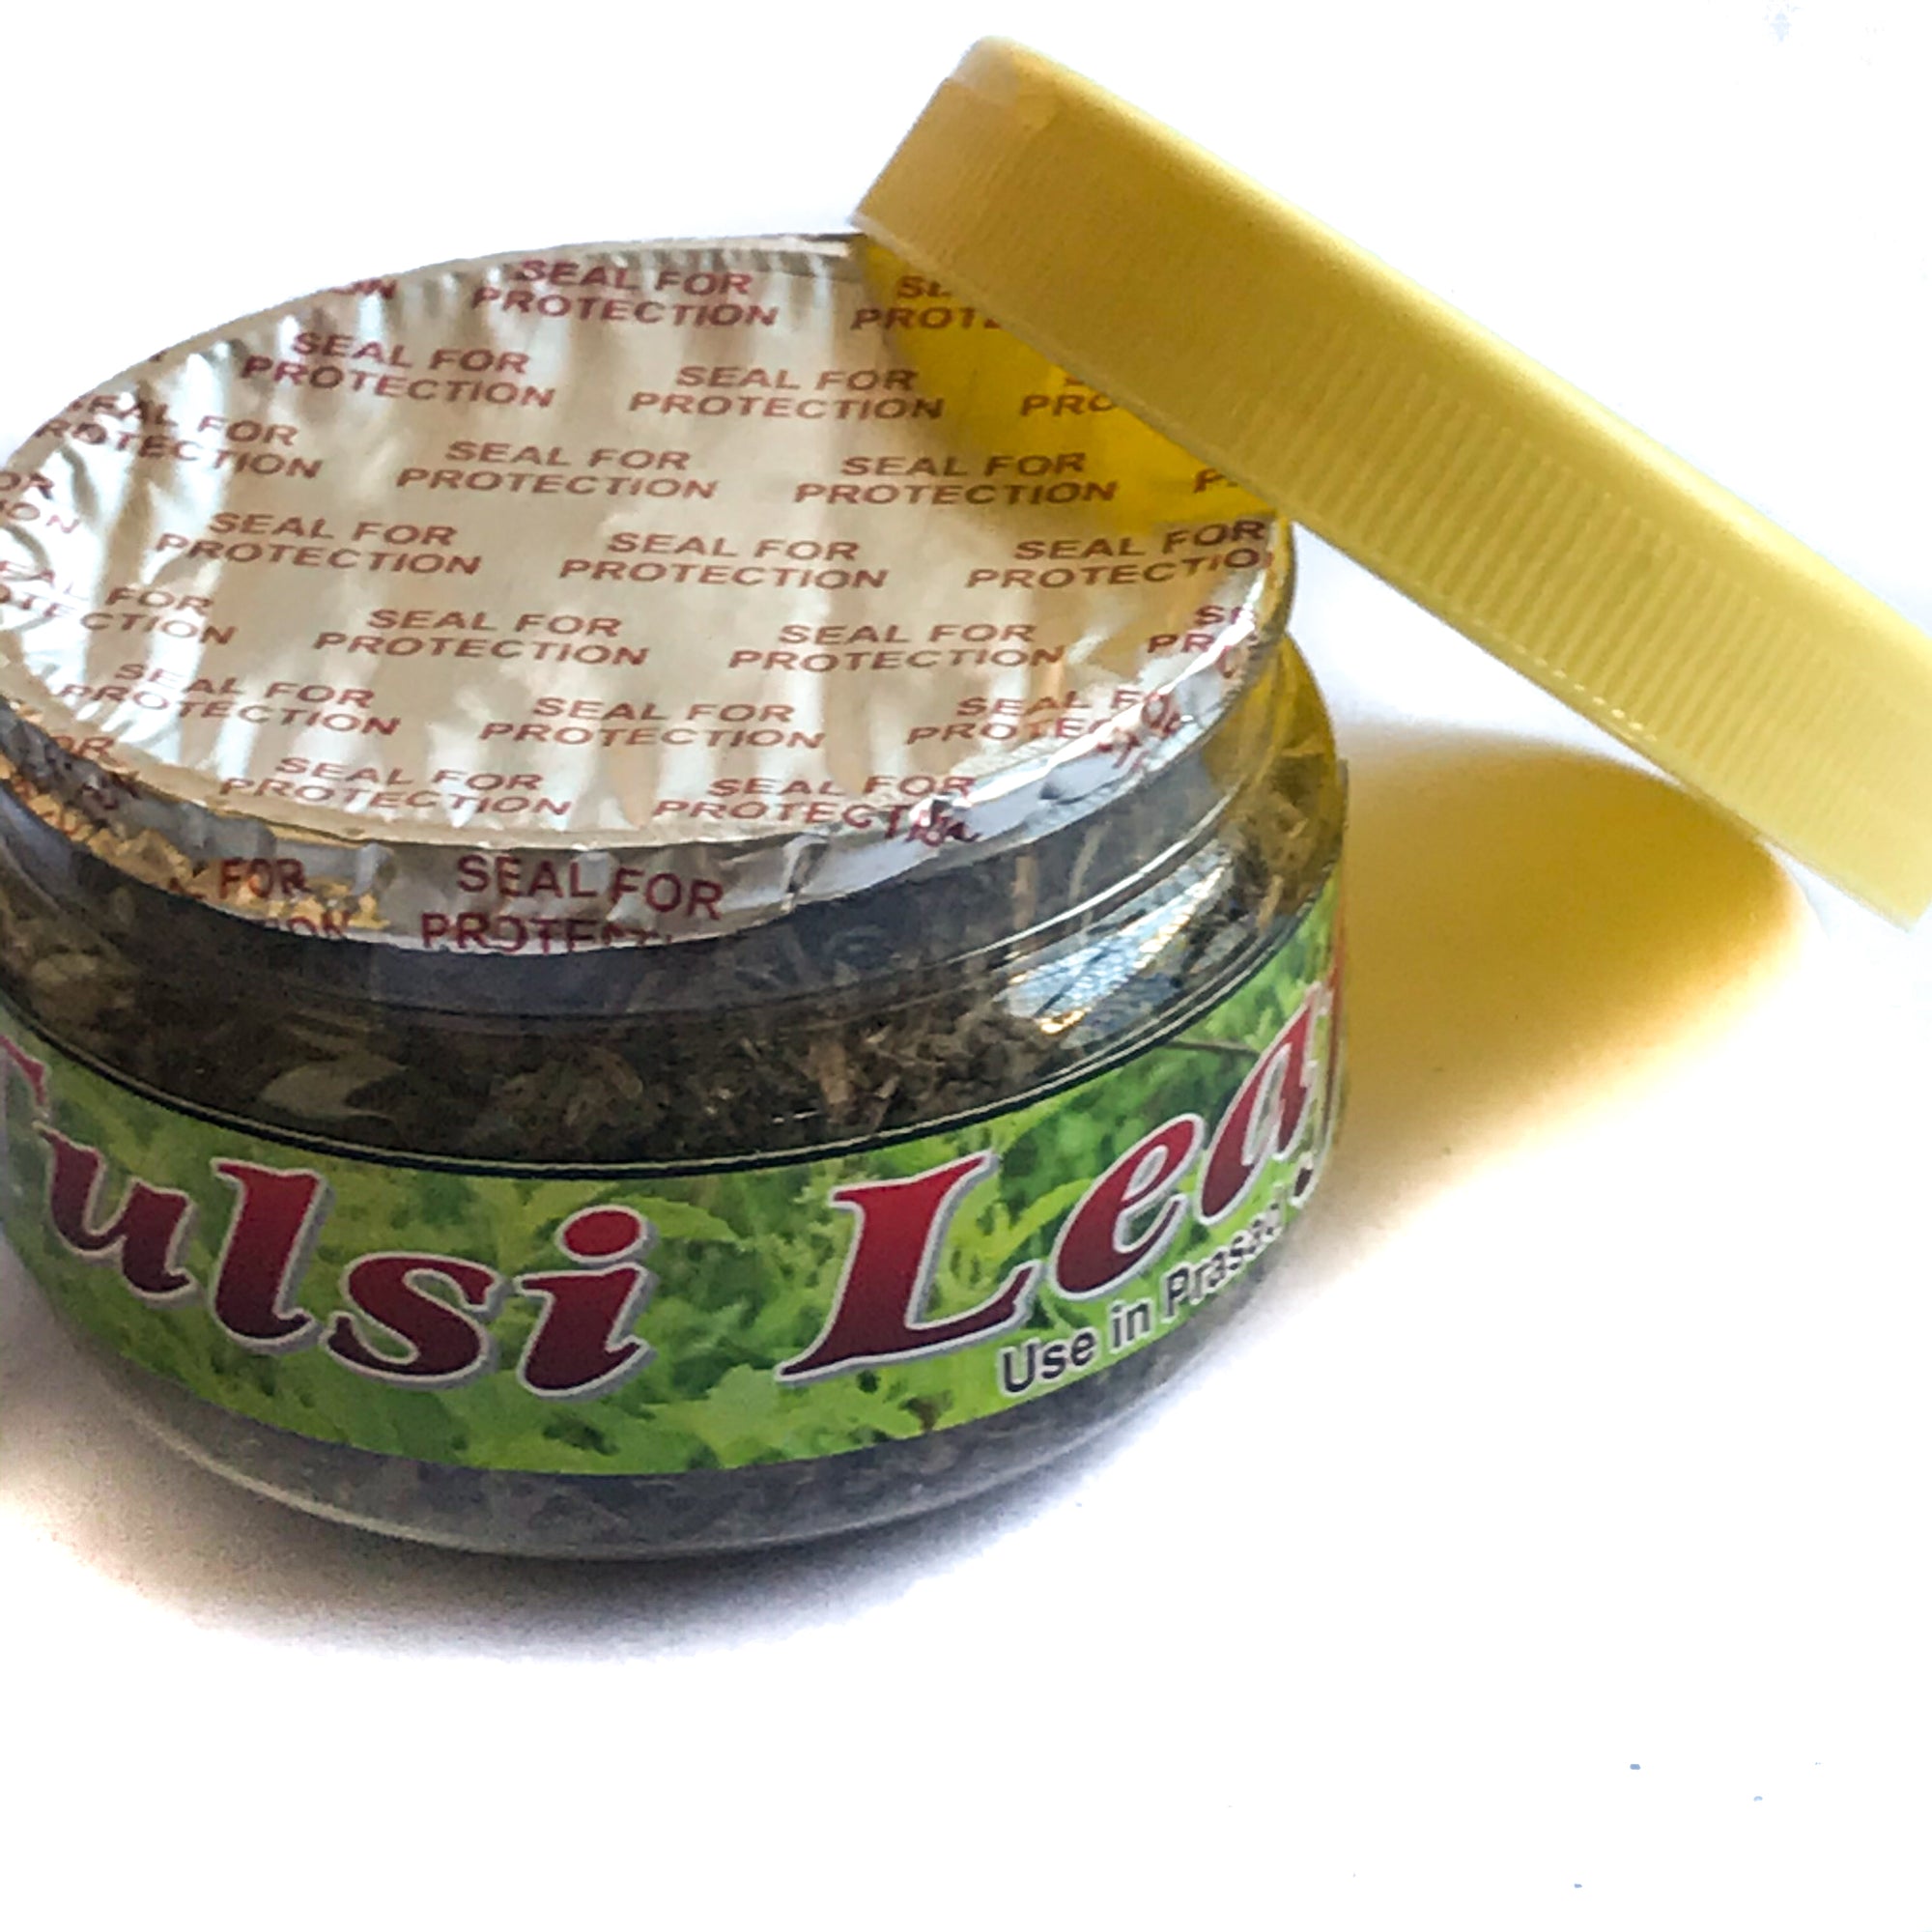 Tulasi Tulsi dried leaves for prasad by IndiOdyssey